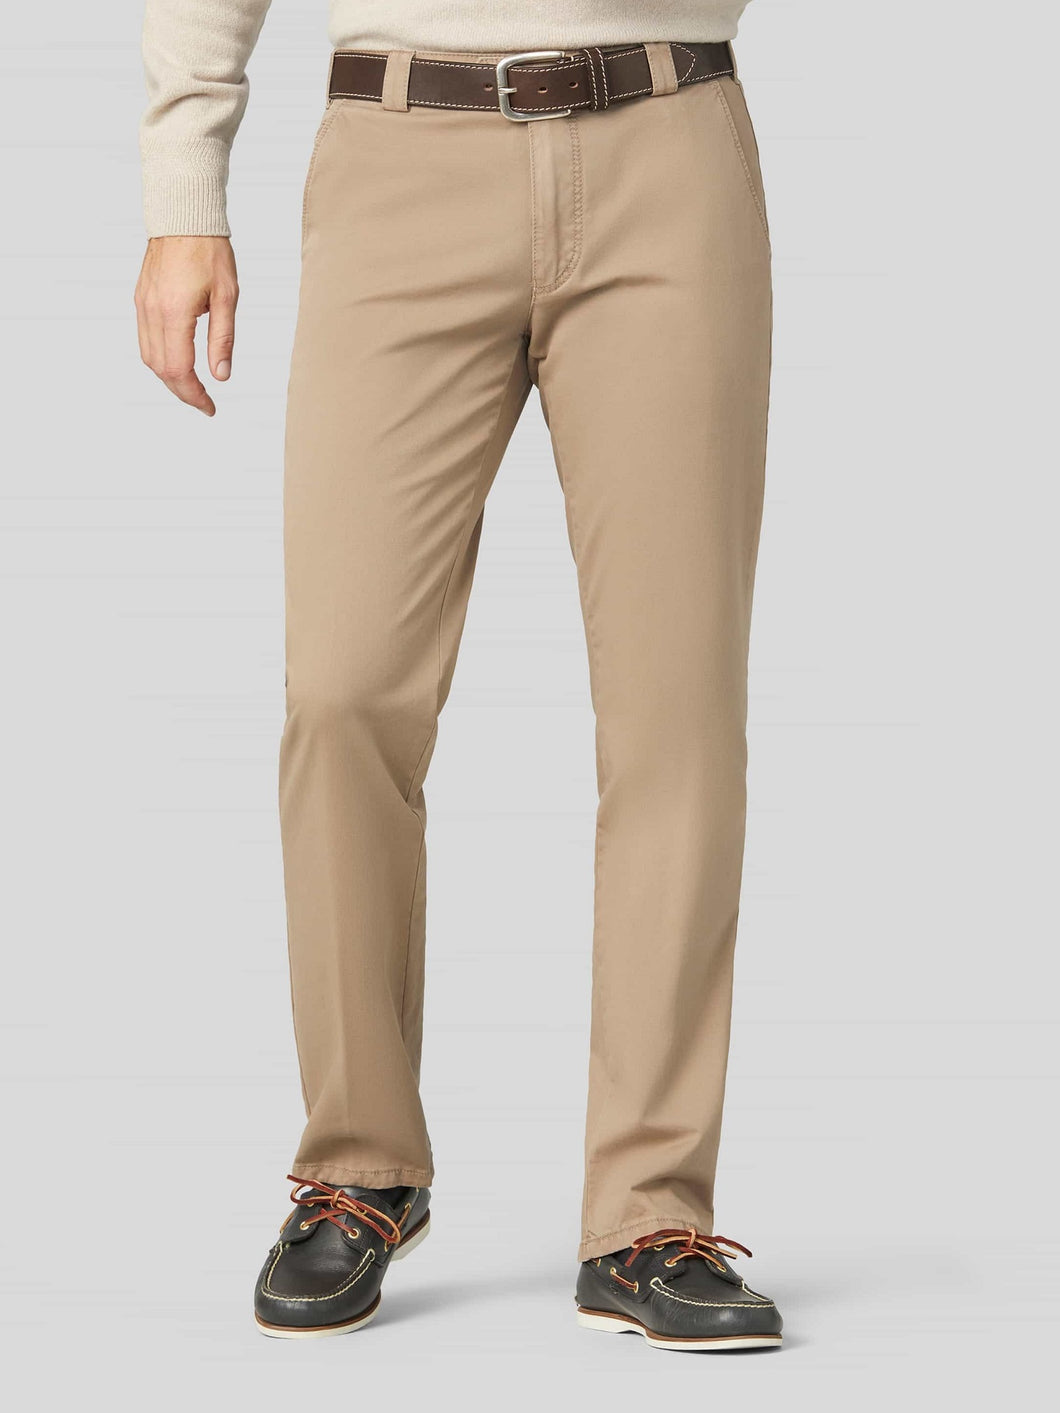 MEYER Trousers - Roma 316 Luxury Cotton Chinos - Beige